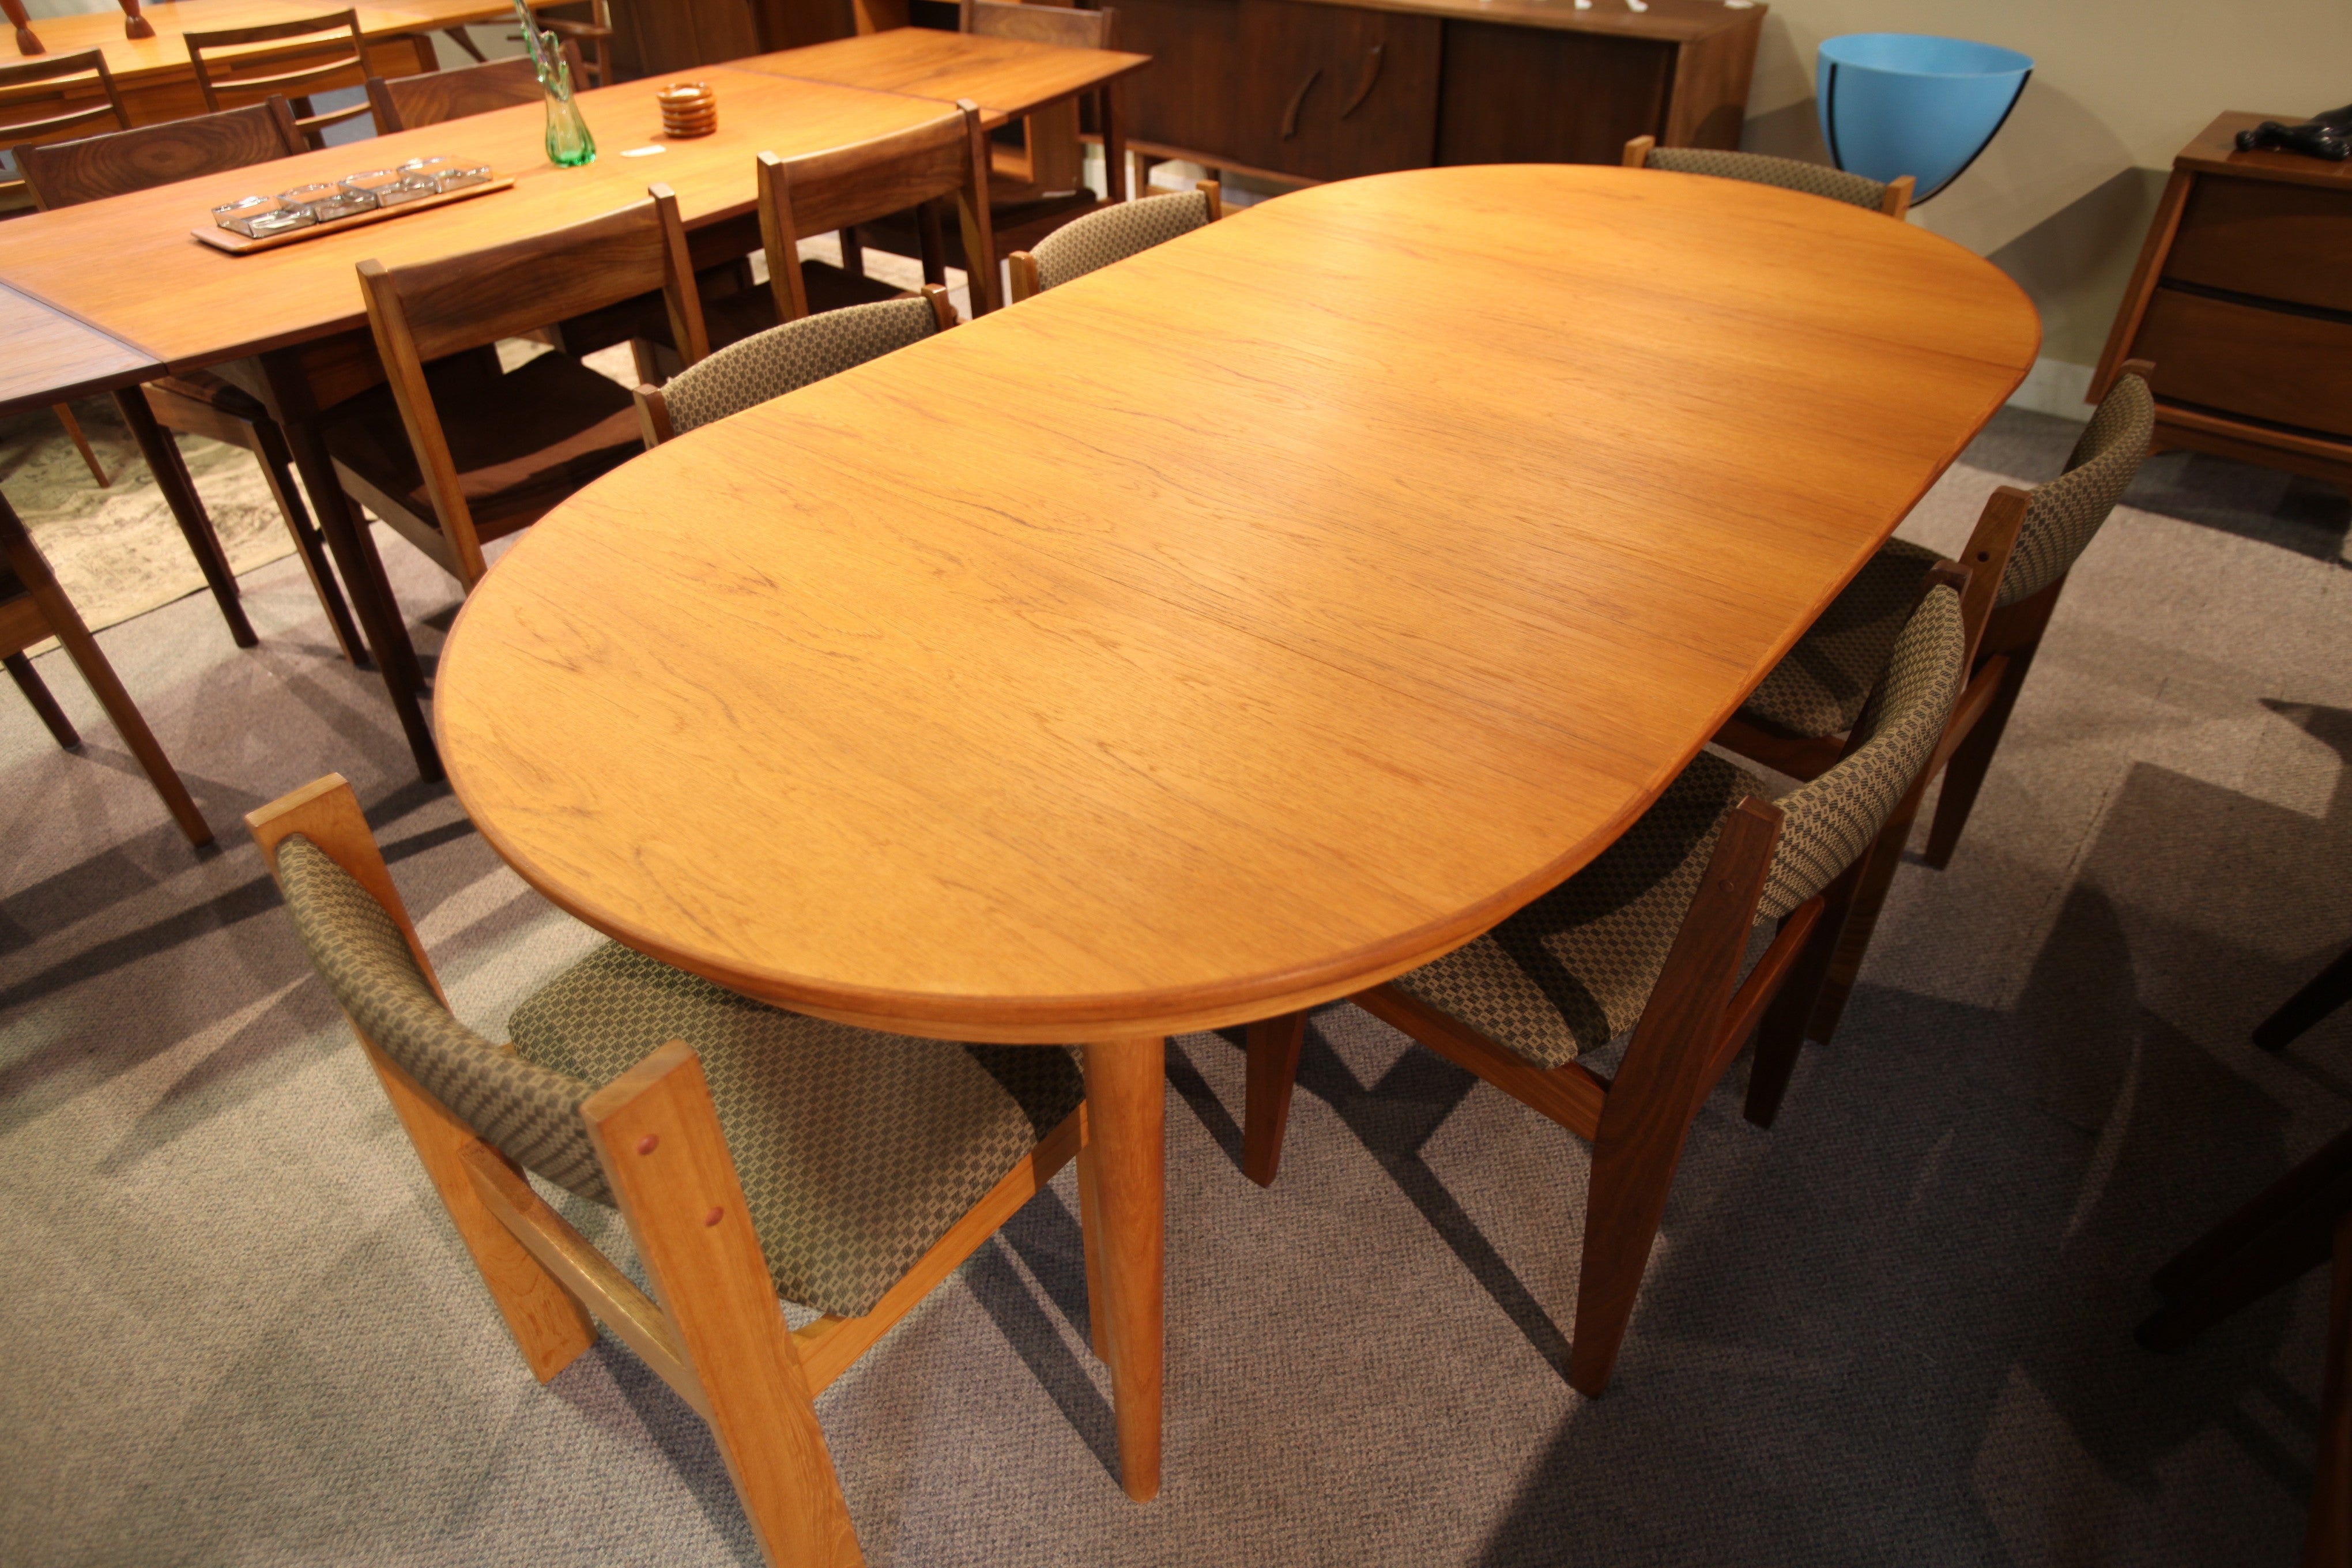 Round Danish Teak Table (2 leafs) 43.25" across (82.75" x 43.25) with extensions